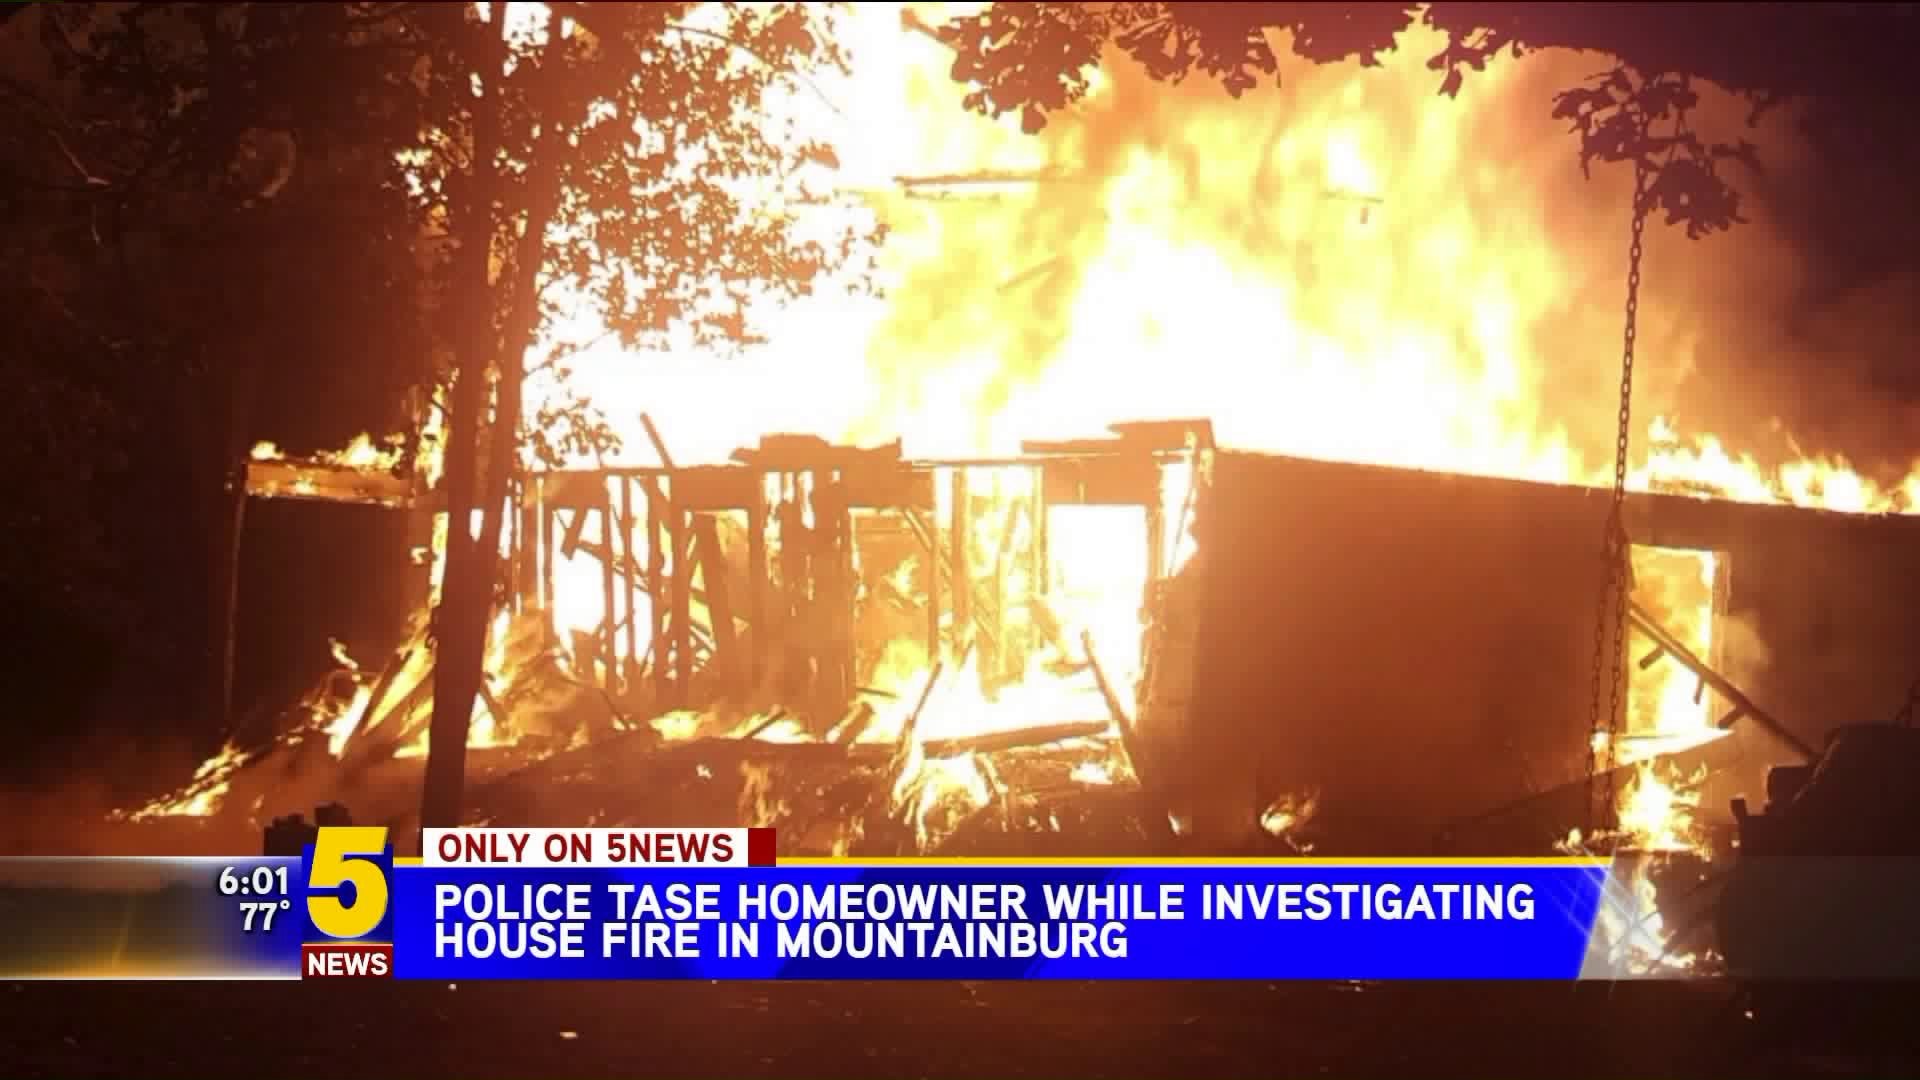 Police Tase Homeowner While Investigating House Fire In Mountainburg